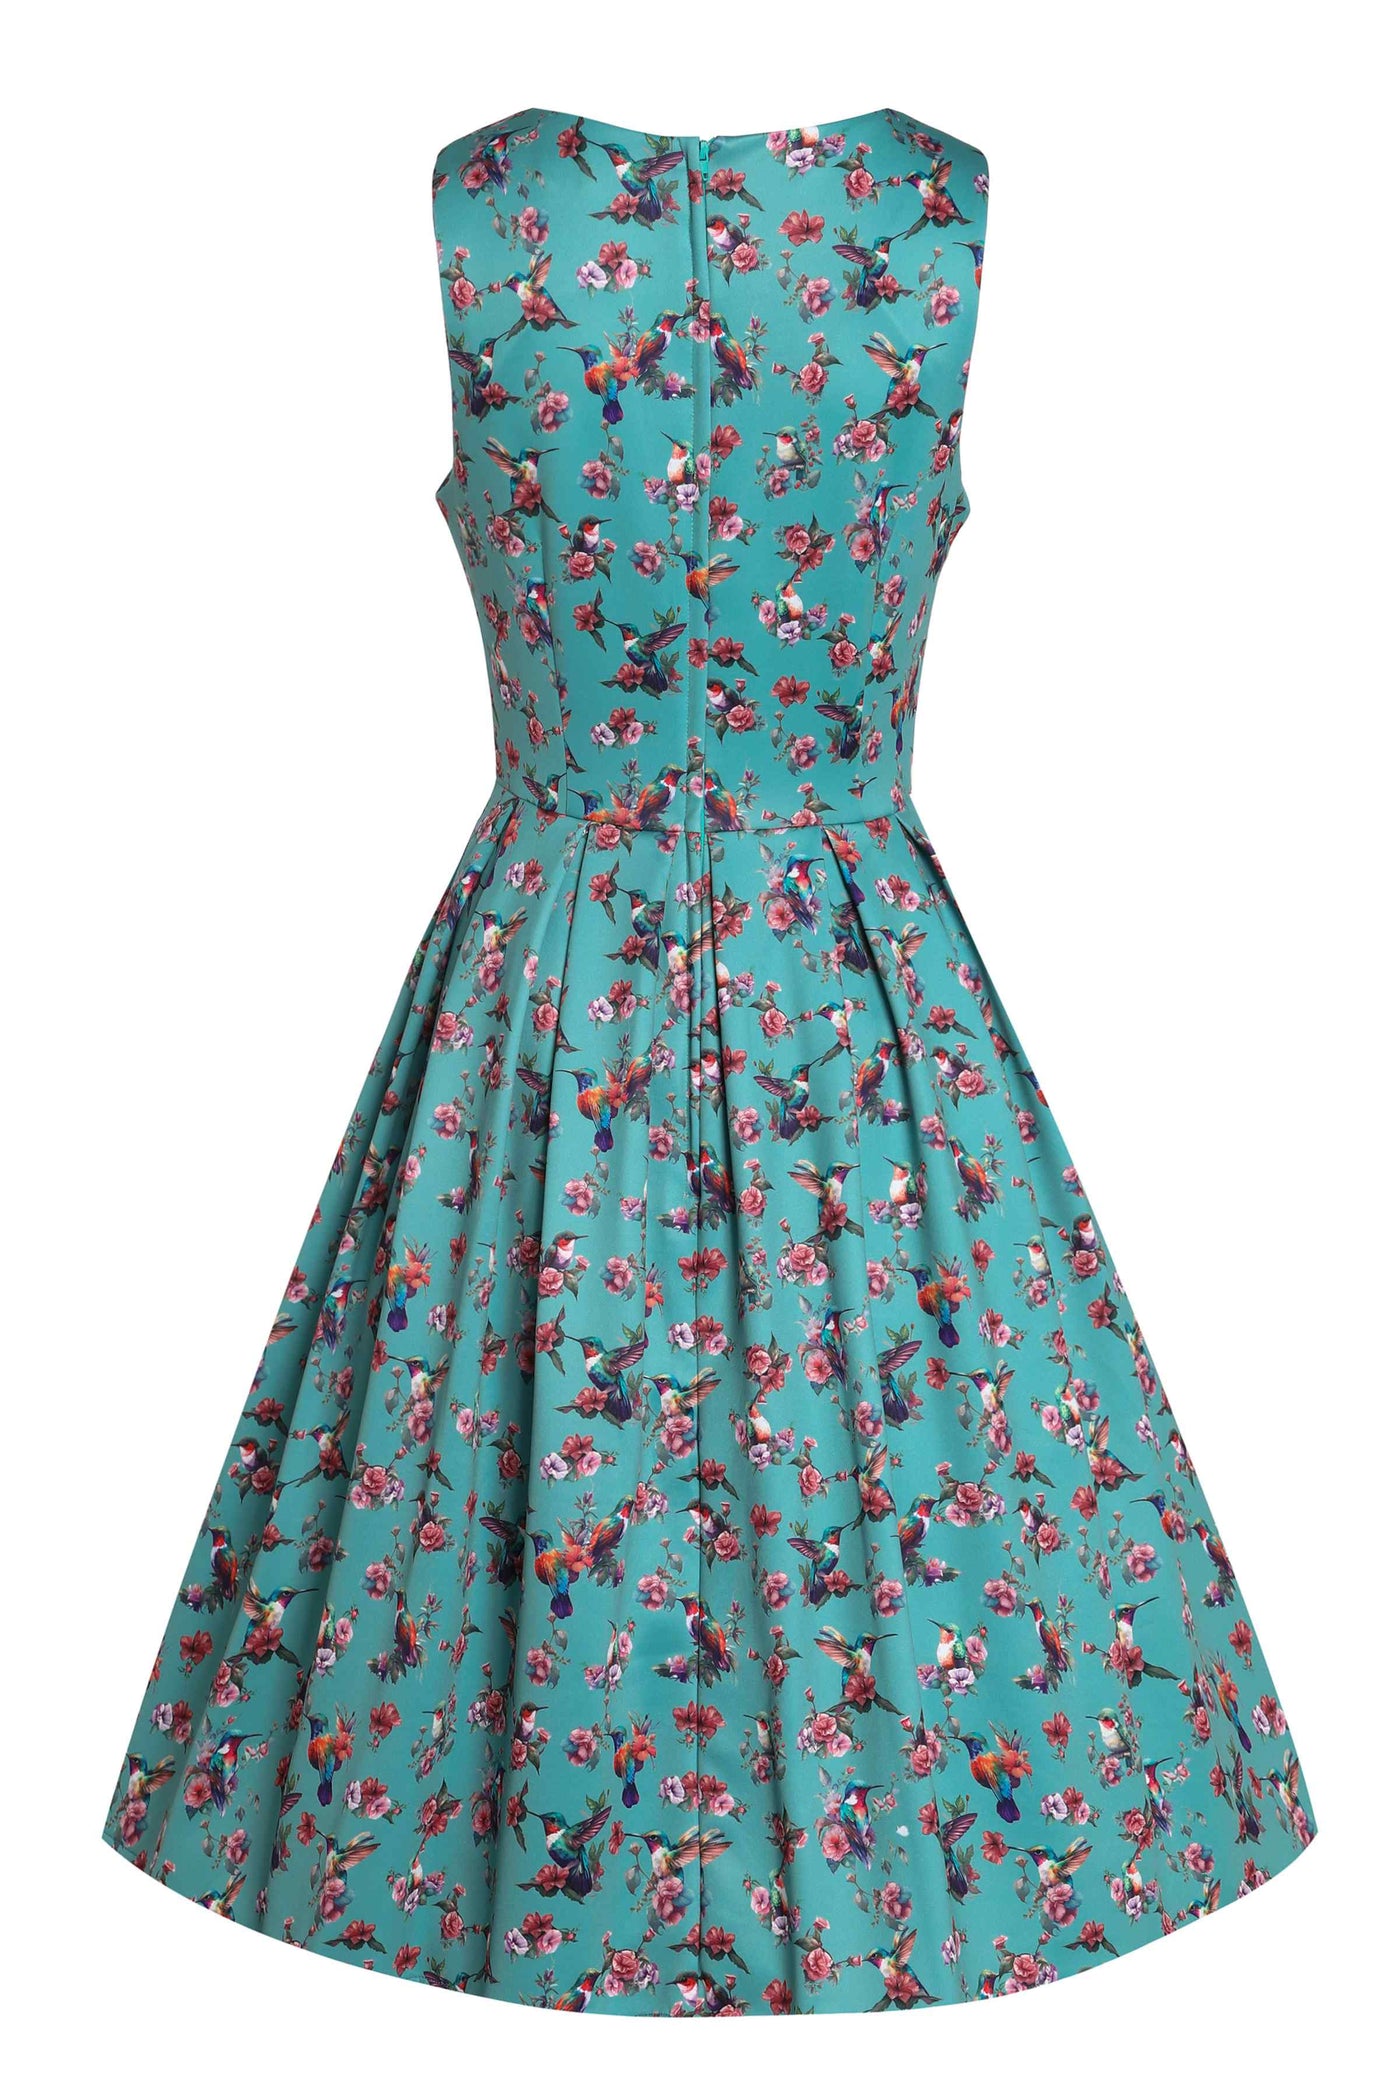 Back View of Turquoise Hummingbird Formal Swing Dress